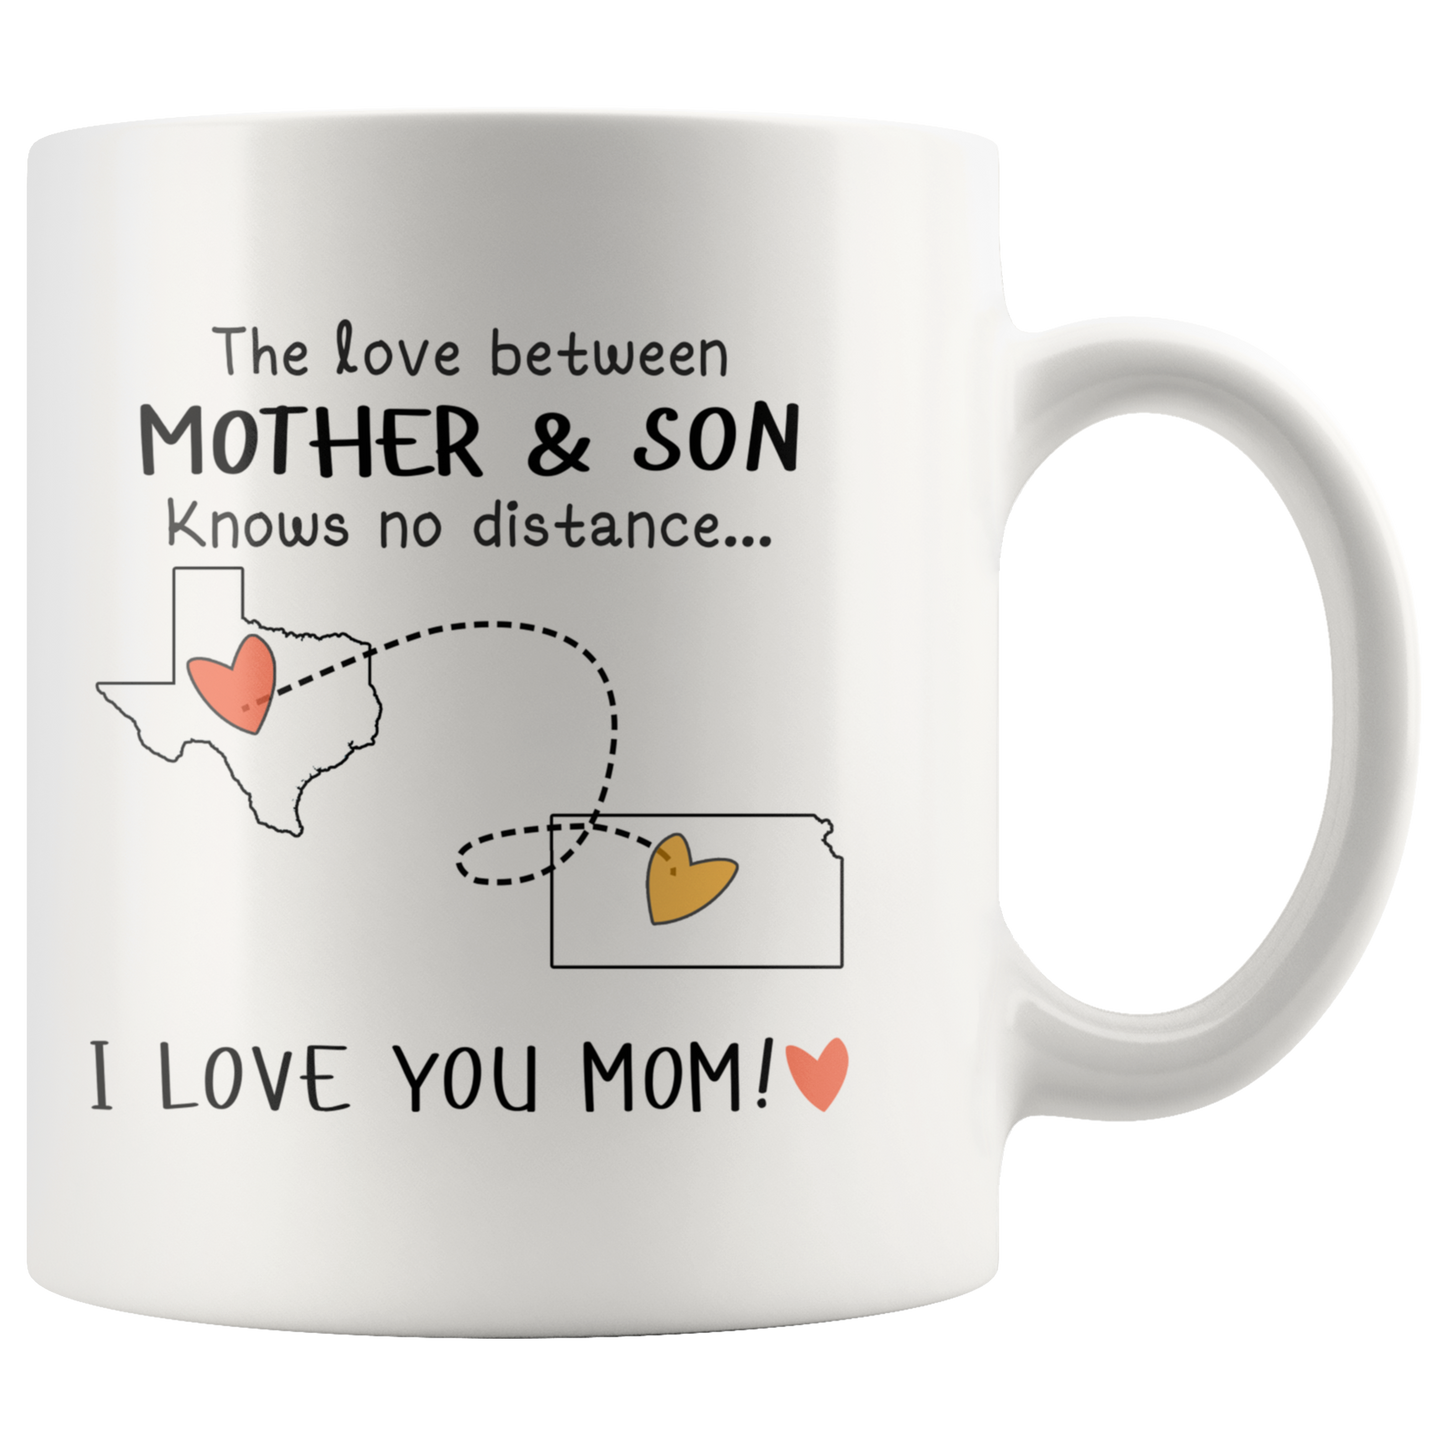 AS169029-sp-23142 - Texas Kansas The Love Between Mother and Son Knows No Distan